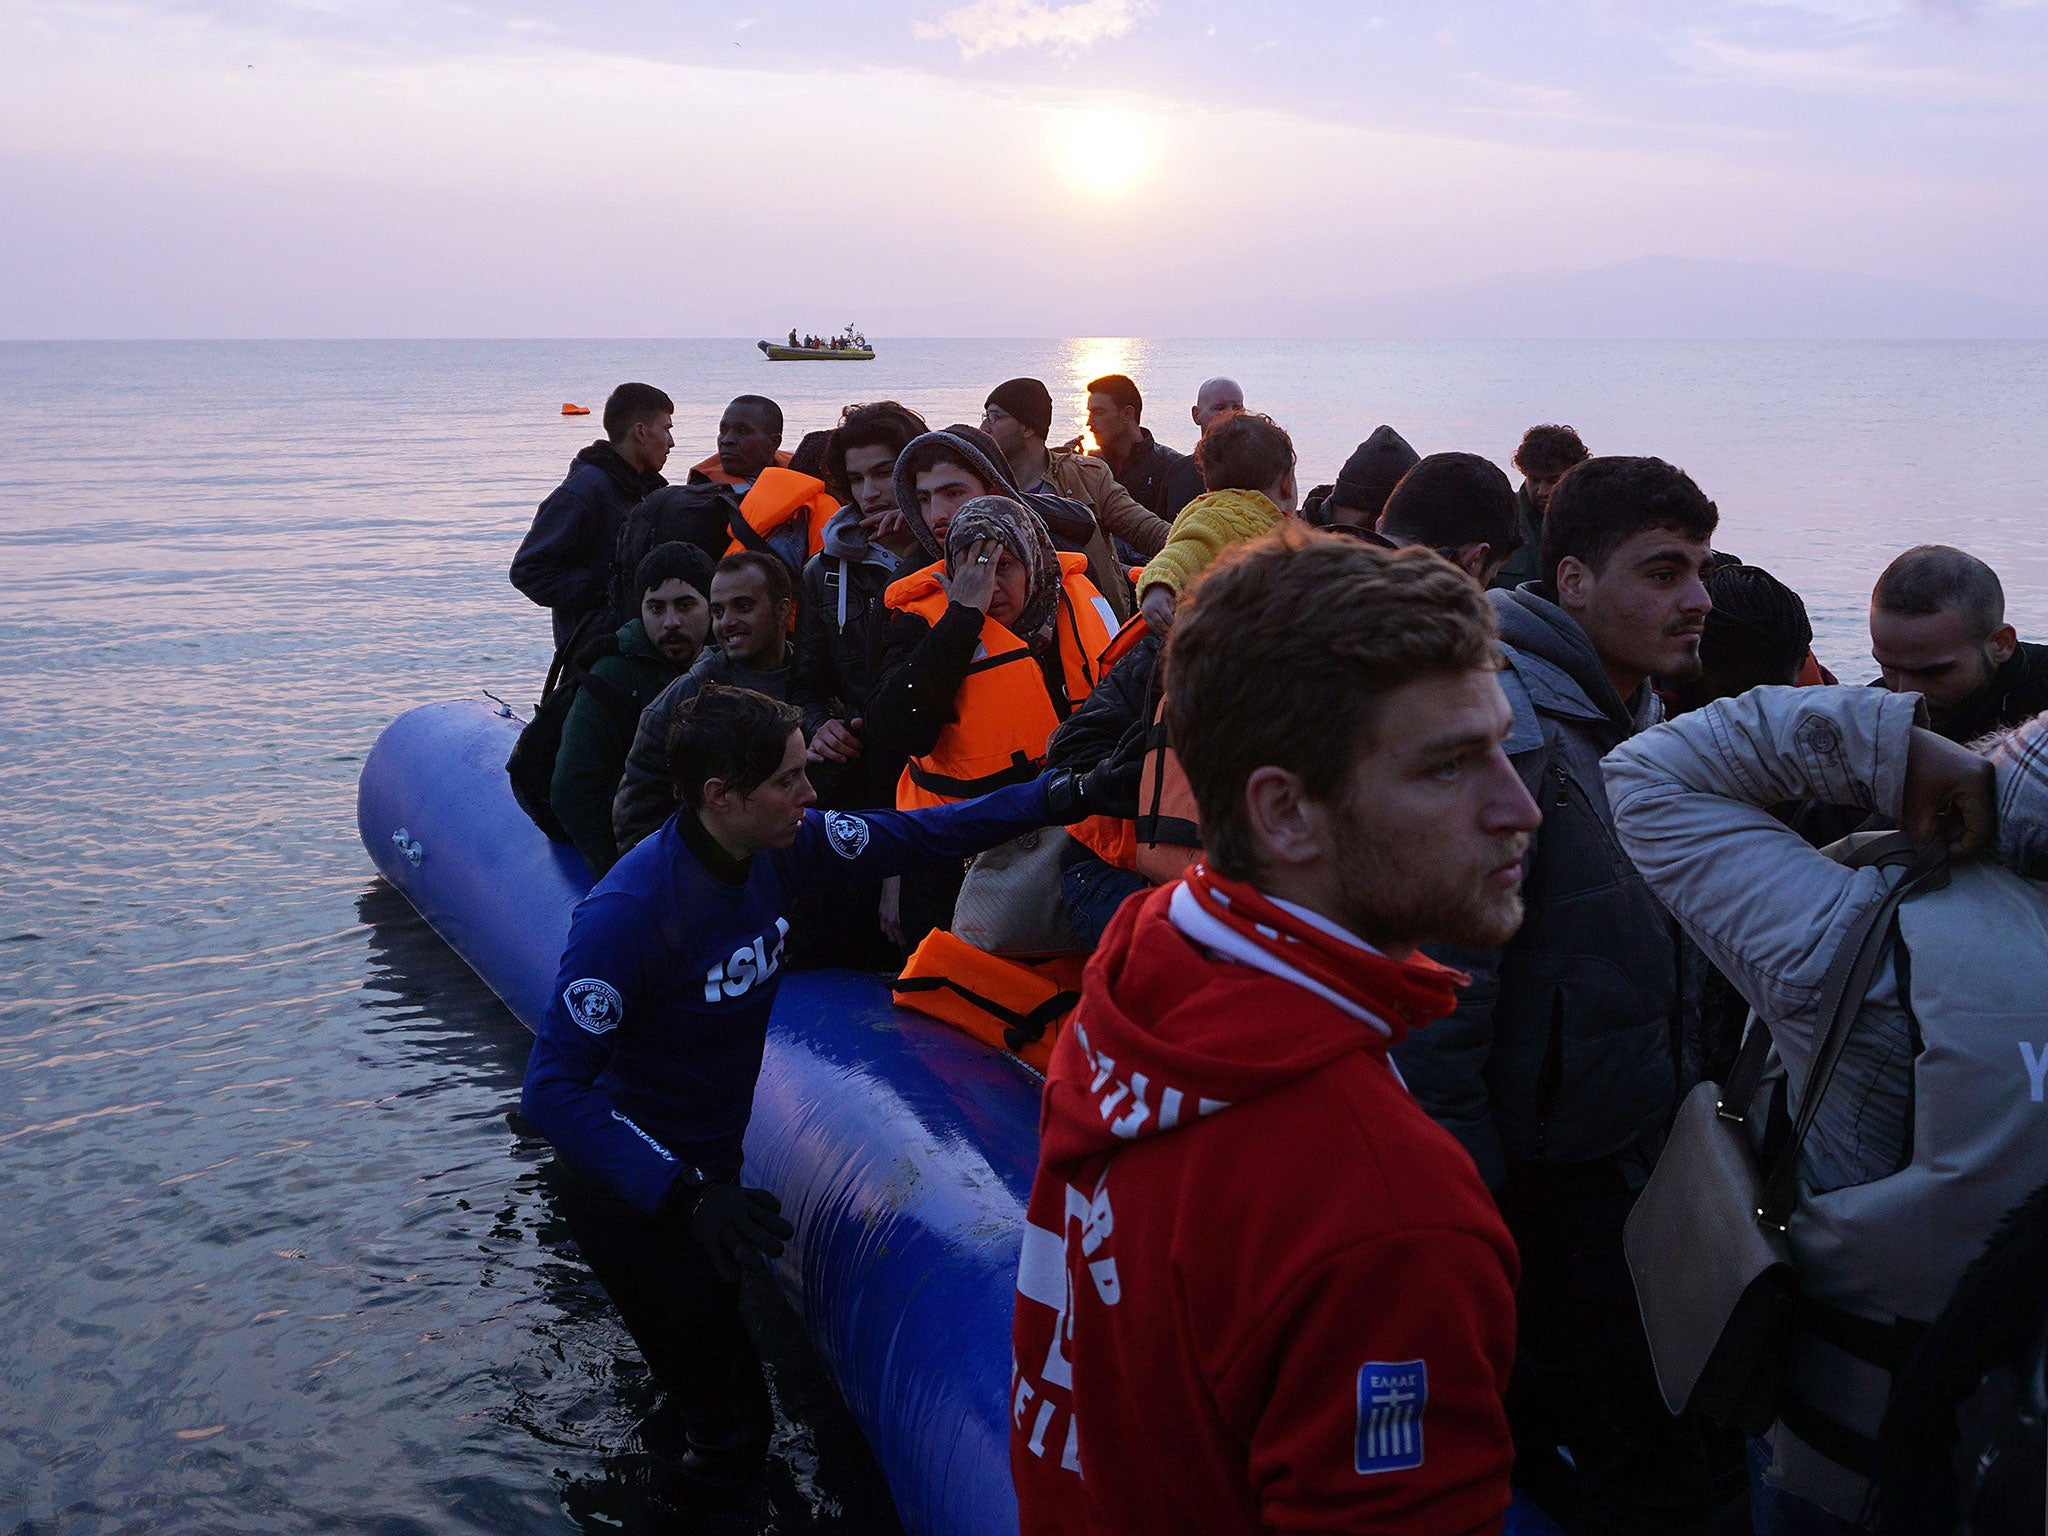 Refugees and migrants arrive on the Greek island of Lesbos